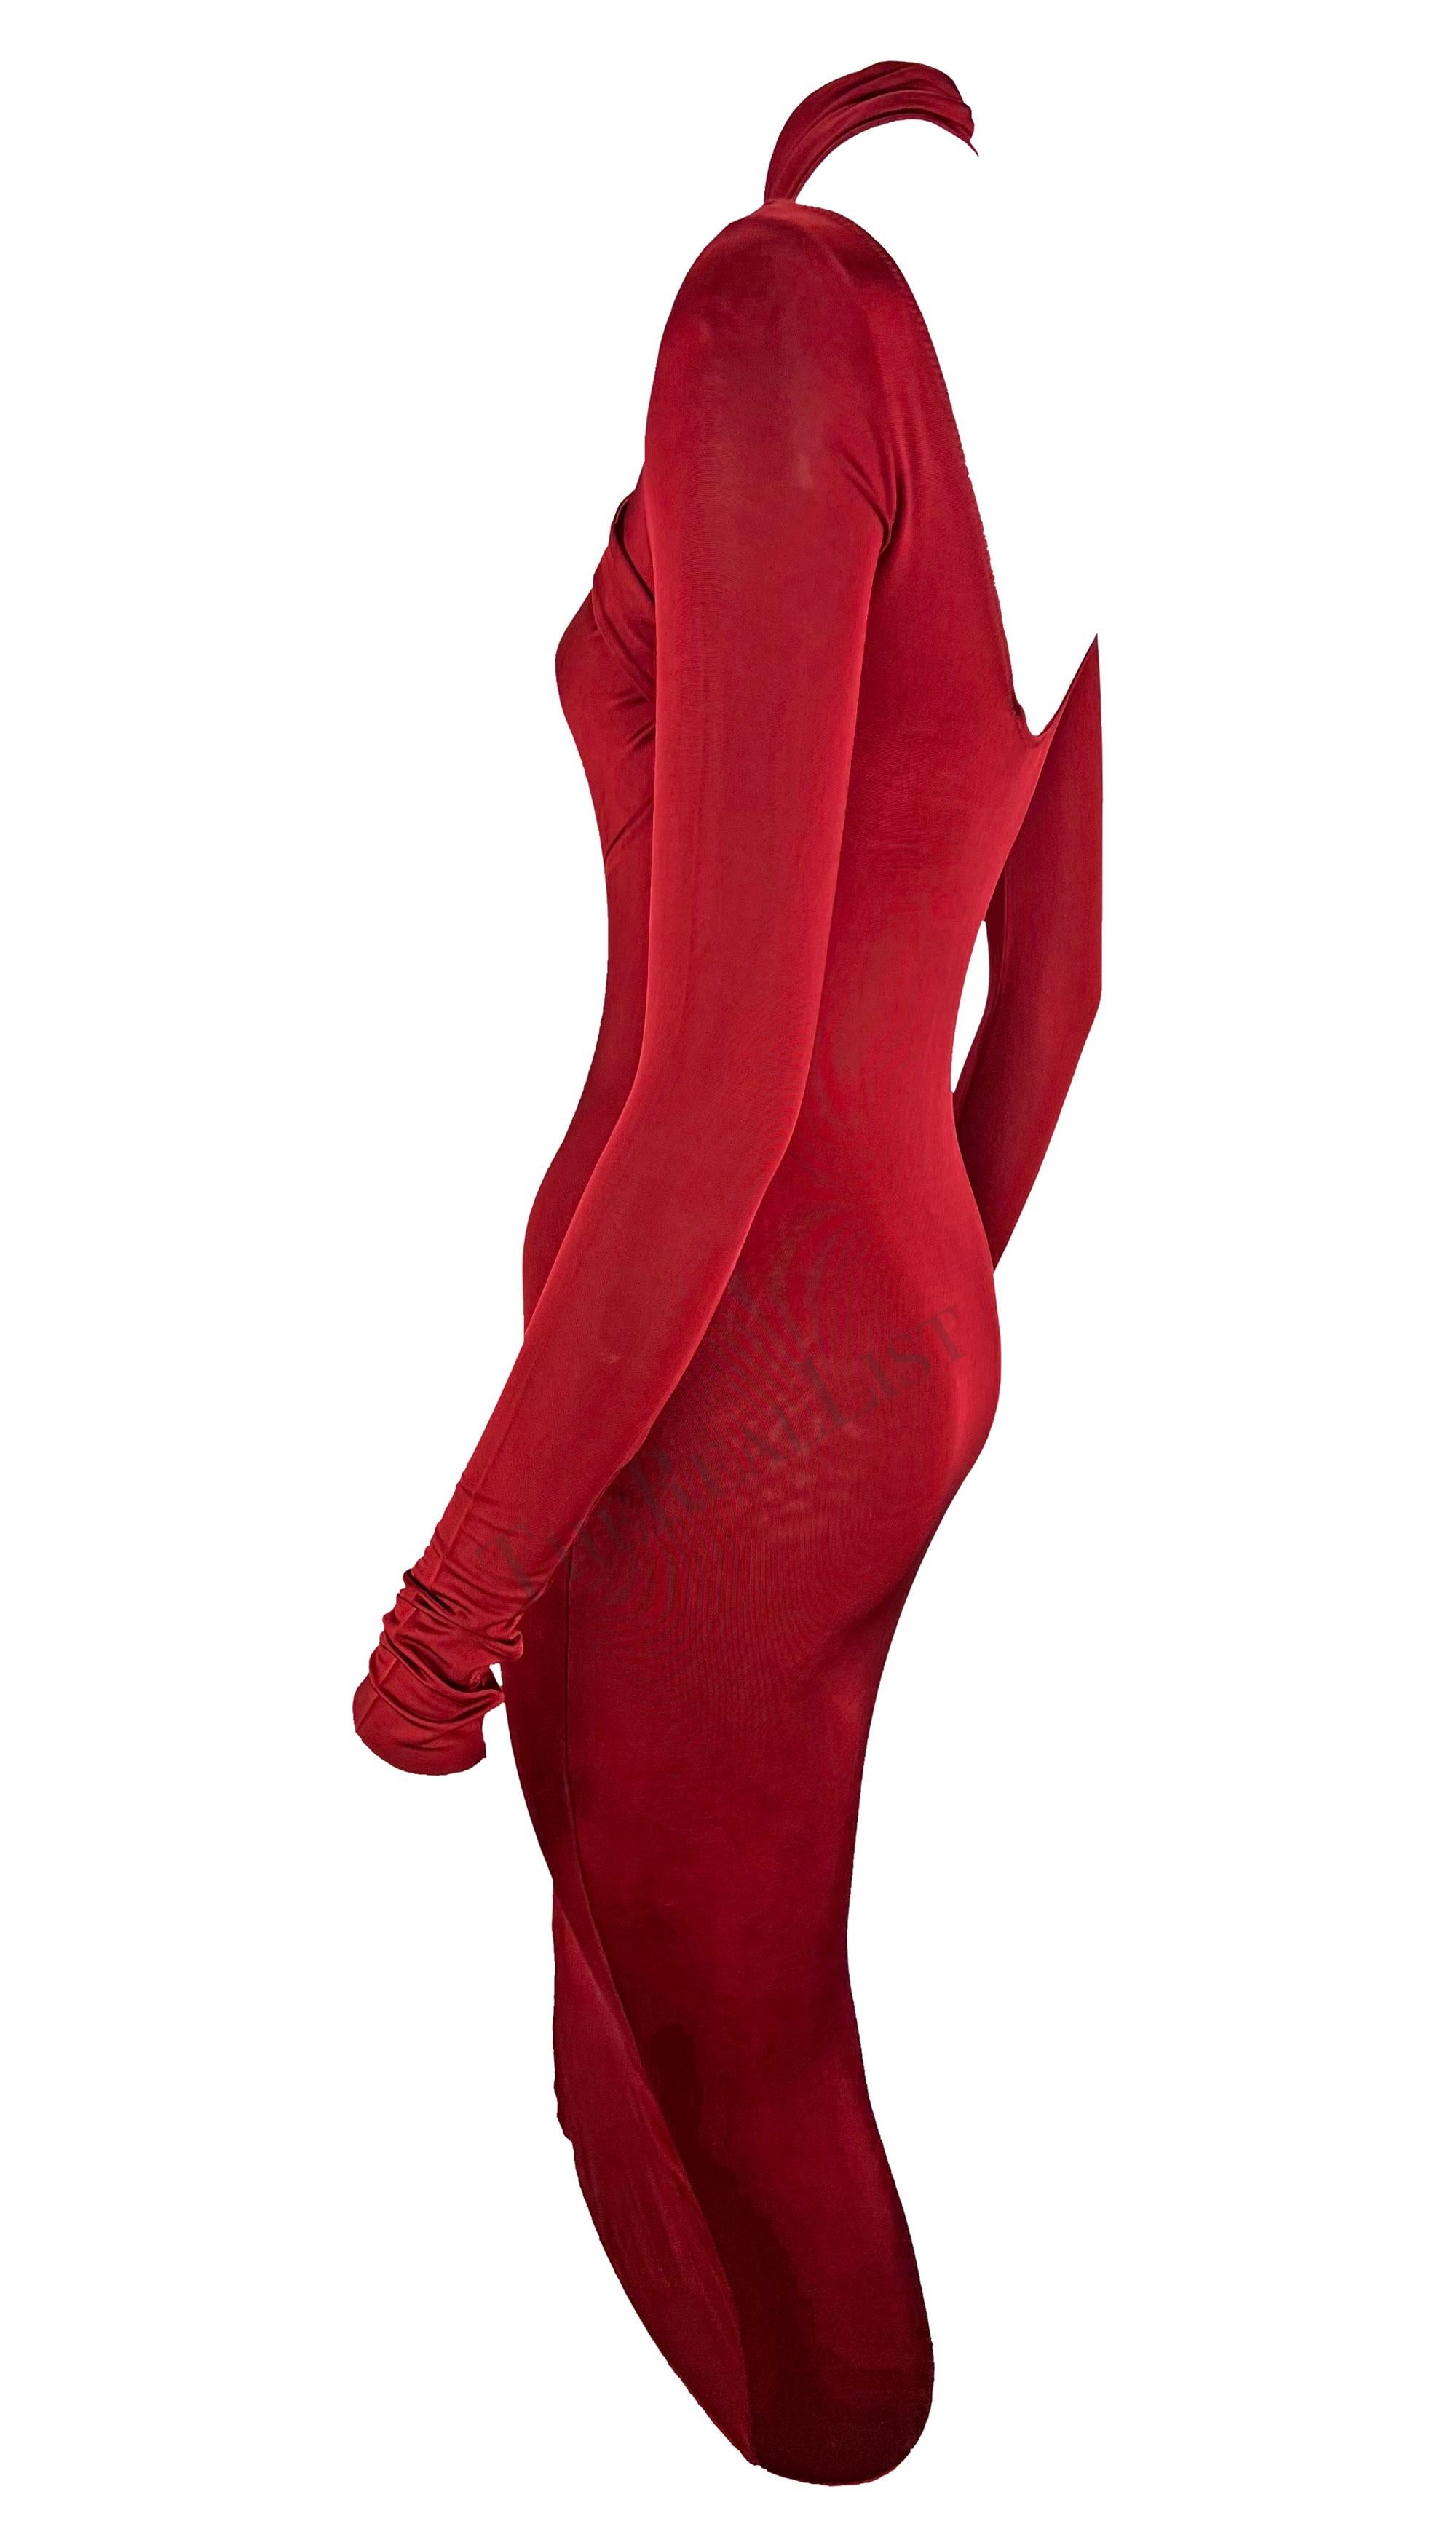 Women's F/W 2003 Gucci by Tom Ford Red Bondage Strap Convertible Stretch Bodycon Dress For Sale